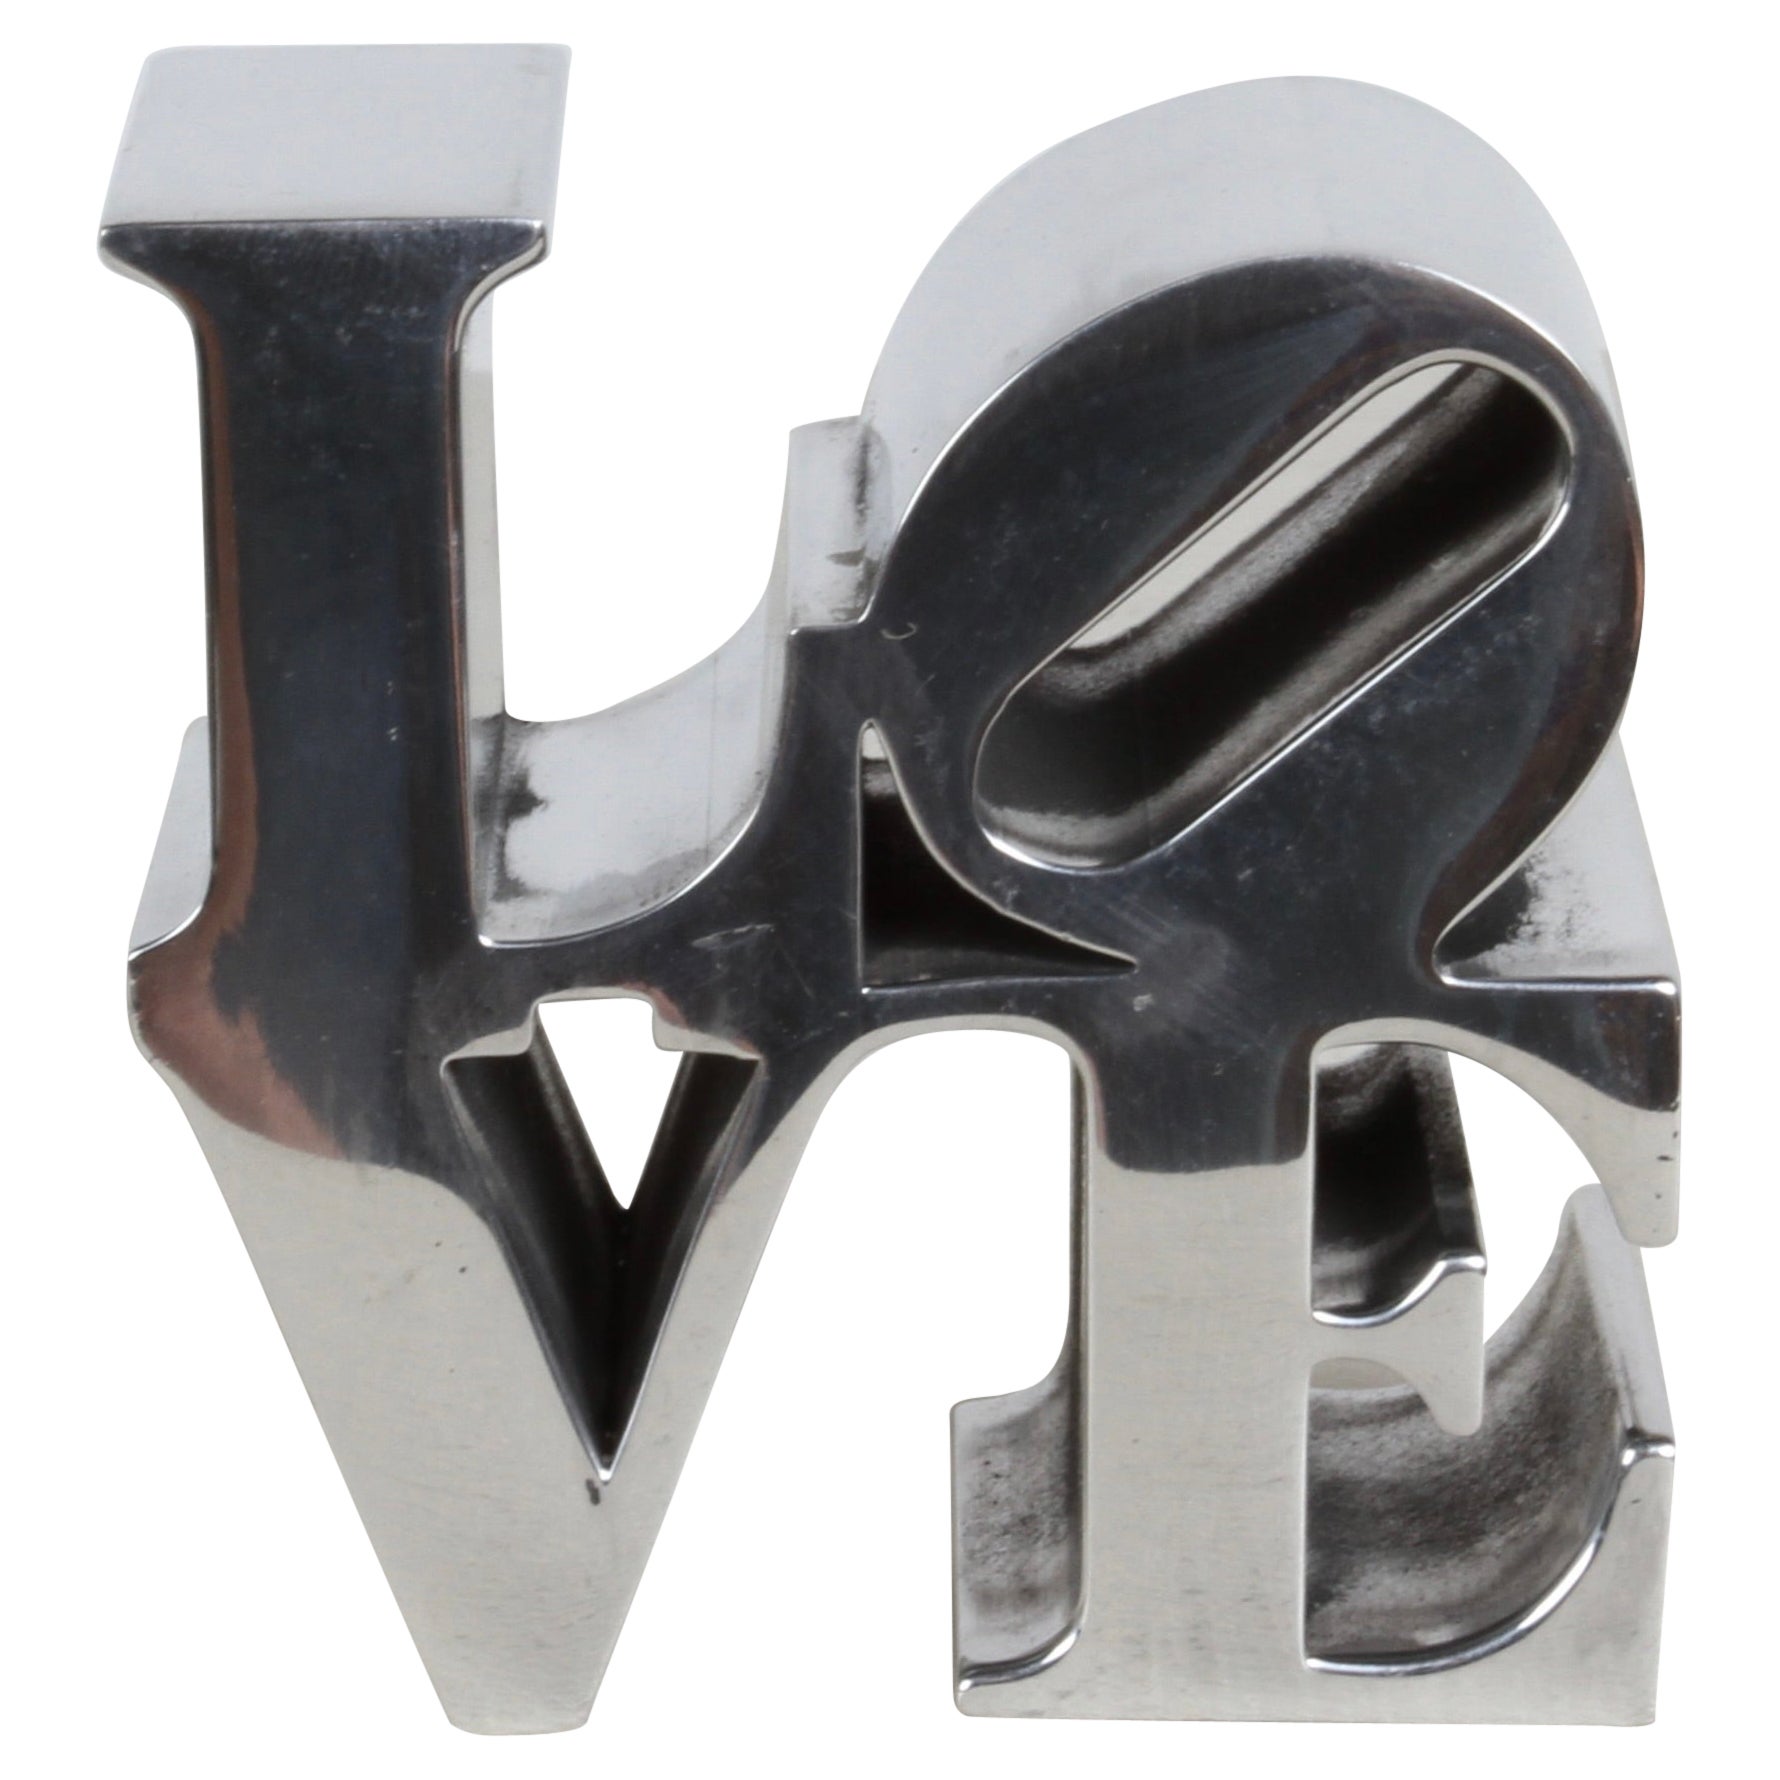  Vintage 70s POP ART Robert Indiana LOVE Sculpture Paperweight or Desk Accessory For Sale